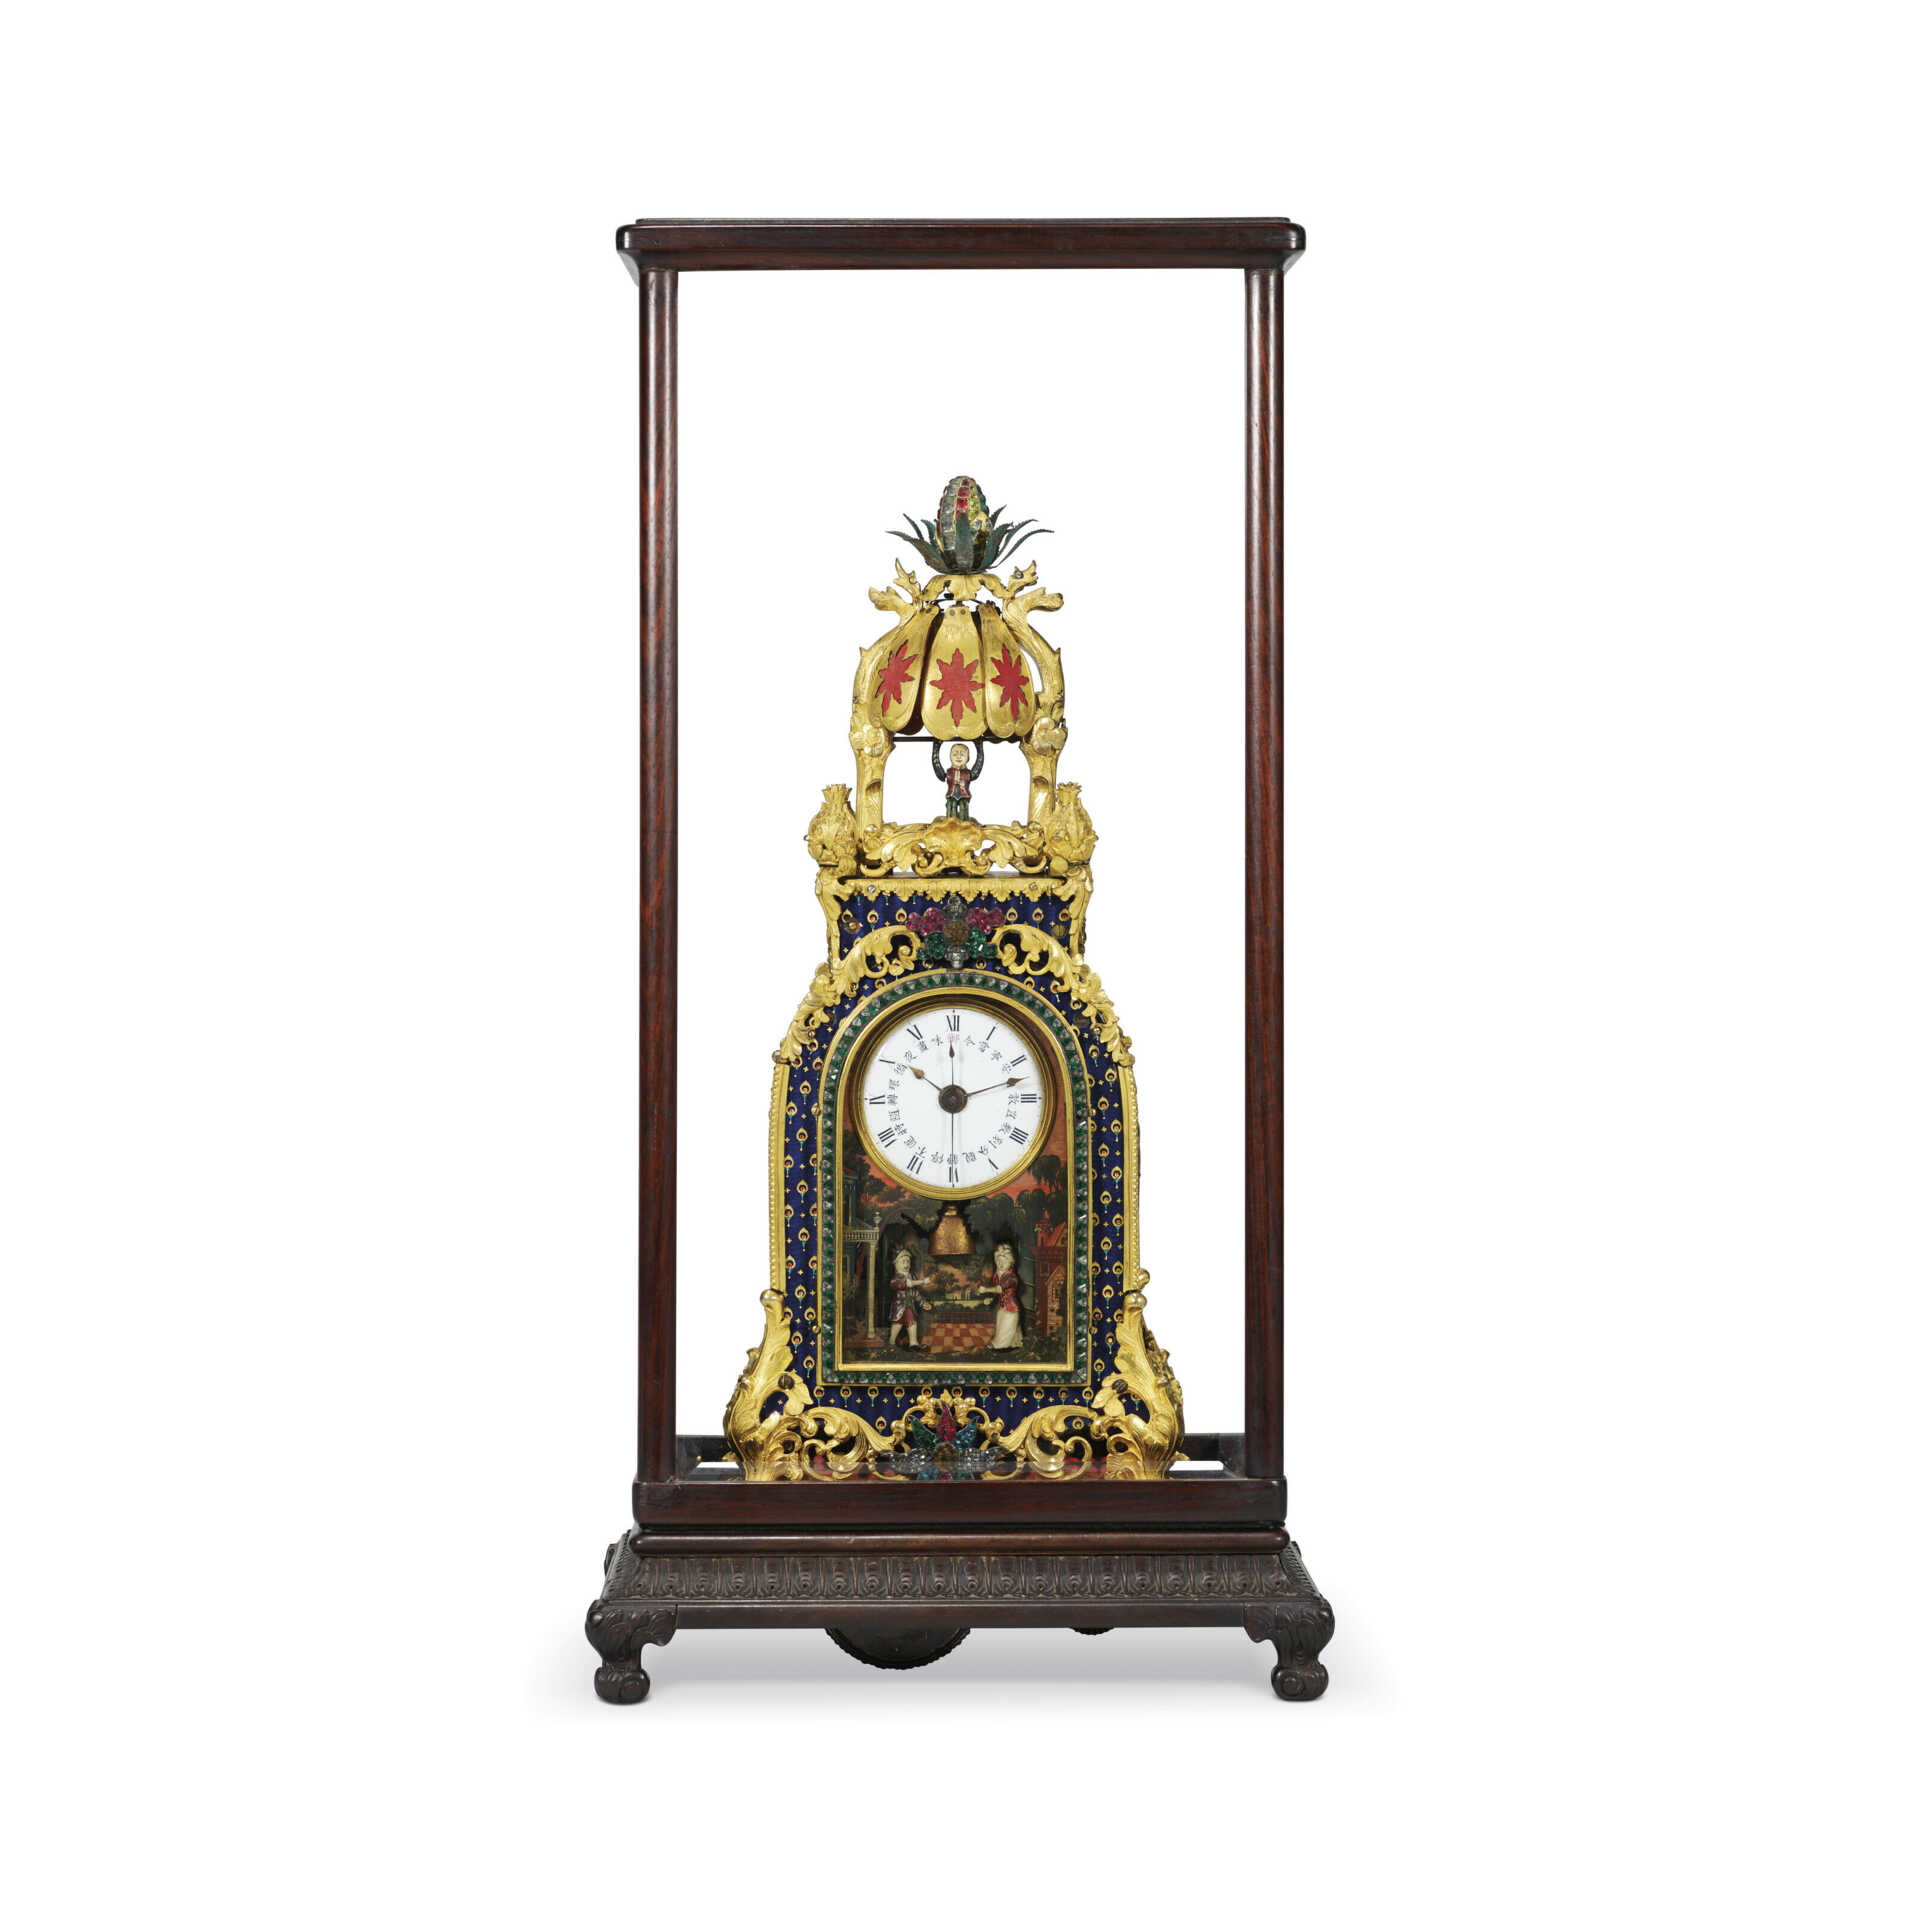 AN IMPERIAL INSCRIBED GILT-BRONZE ENAMEL, PASTE-INSET, QUARTER-STRIKING, MUSICAL AND AUTOMATON ‘ACROBAT’ CLOCK